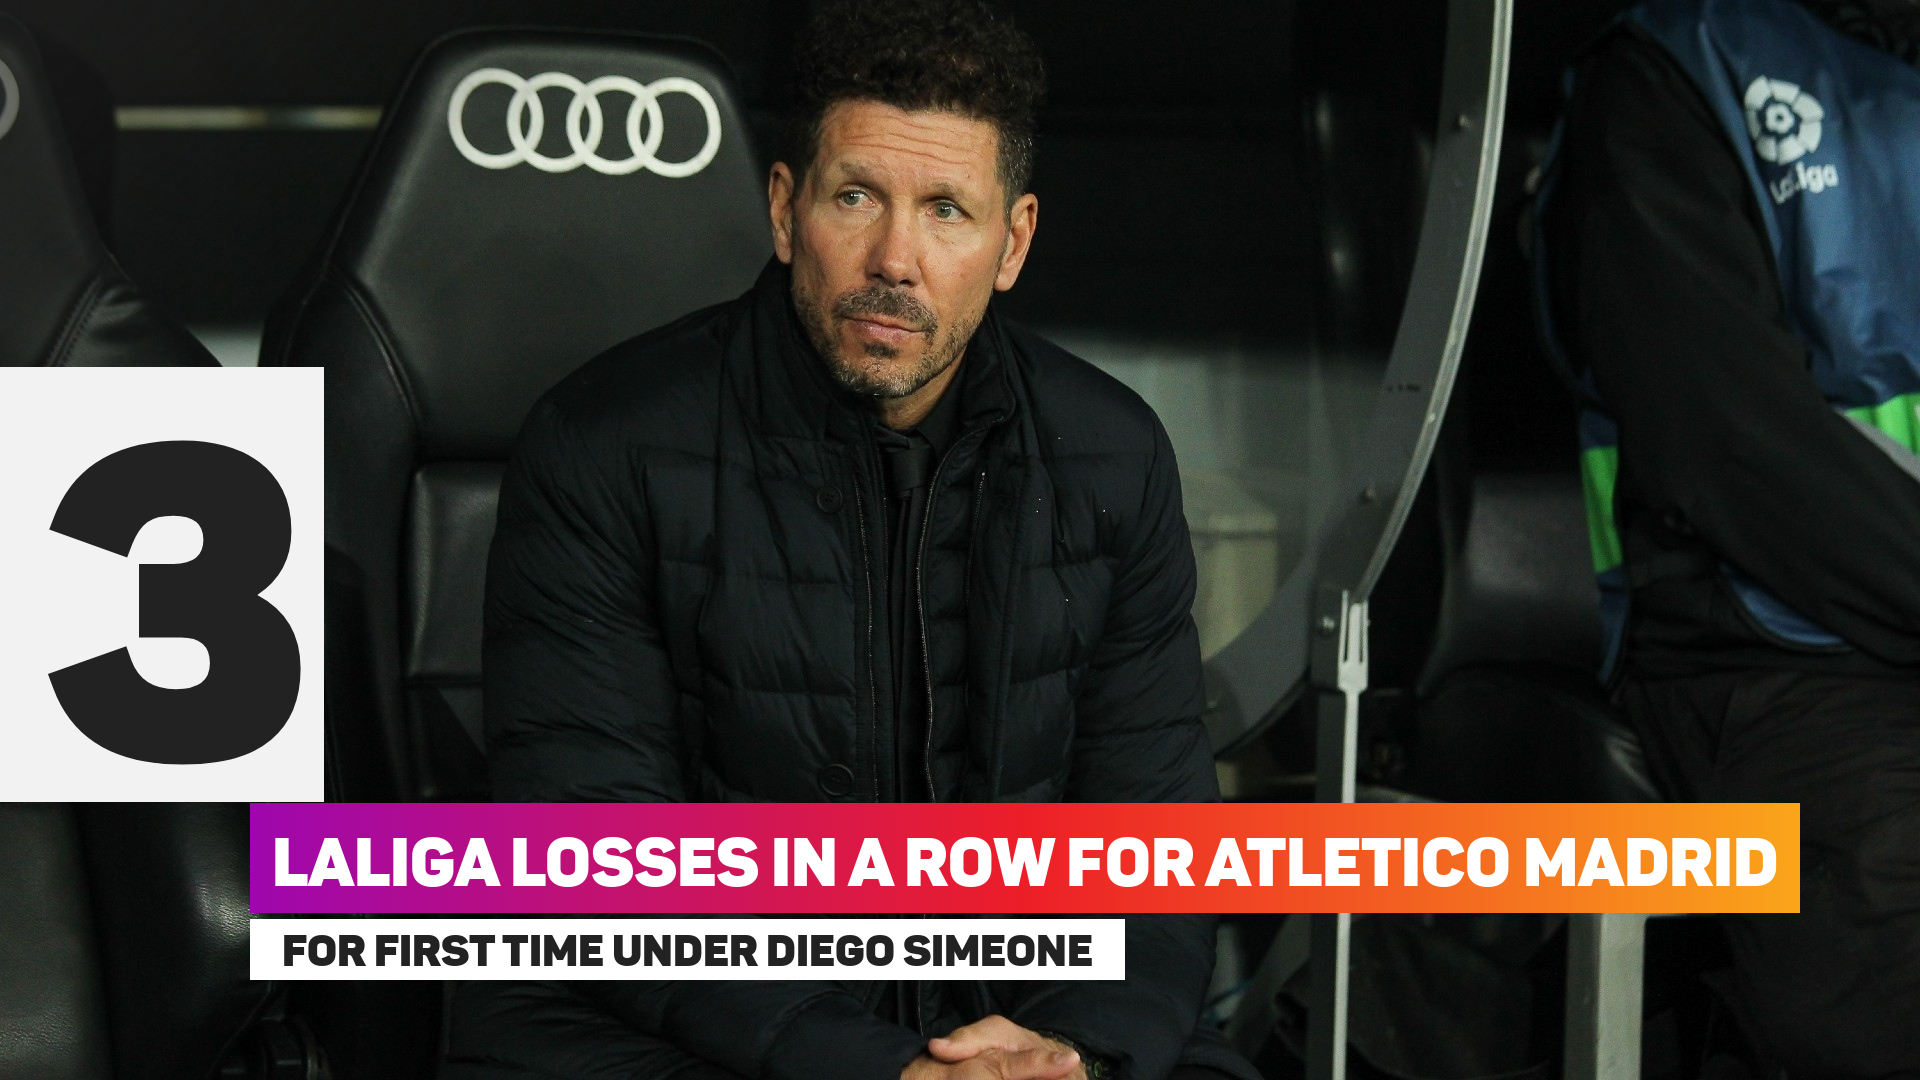 Atletico have lost three league games in a row